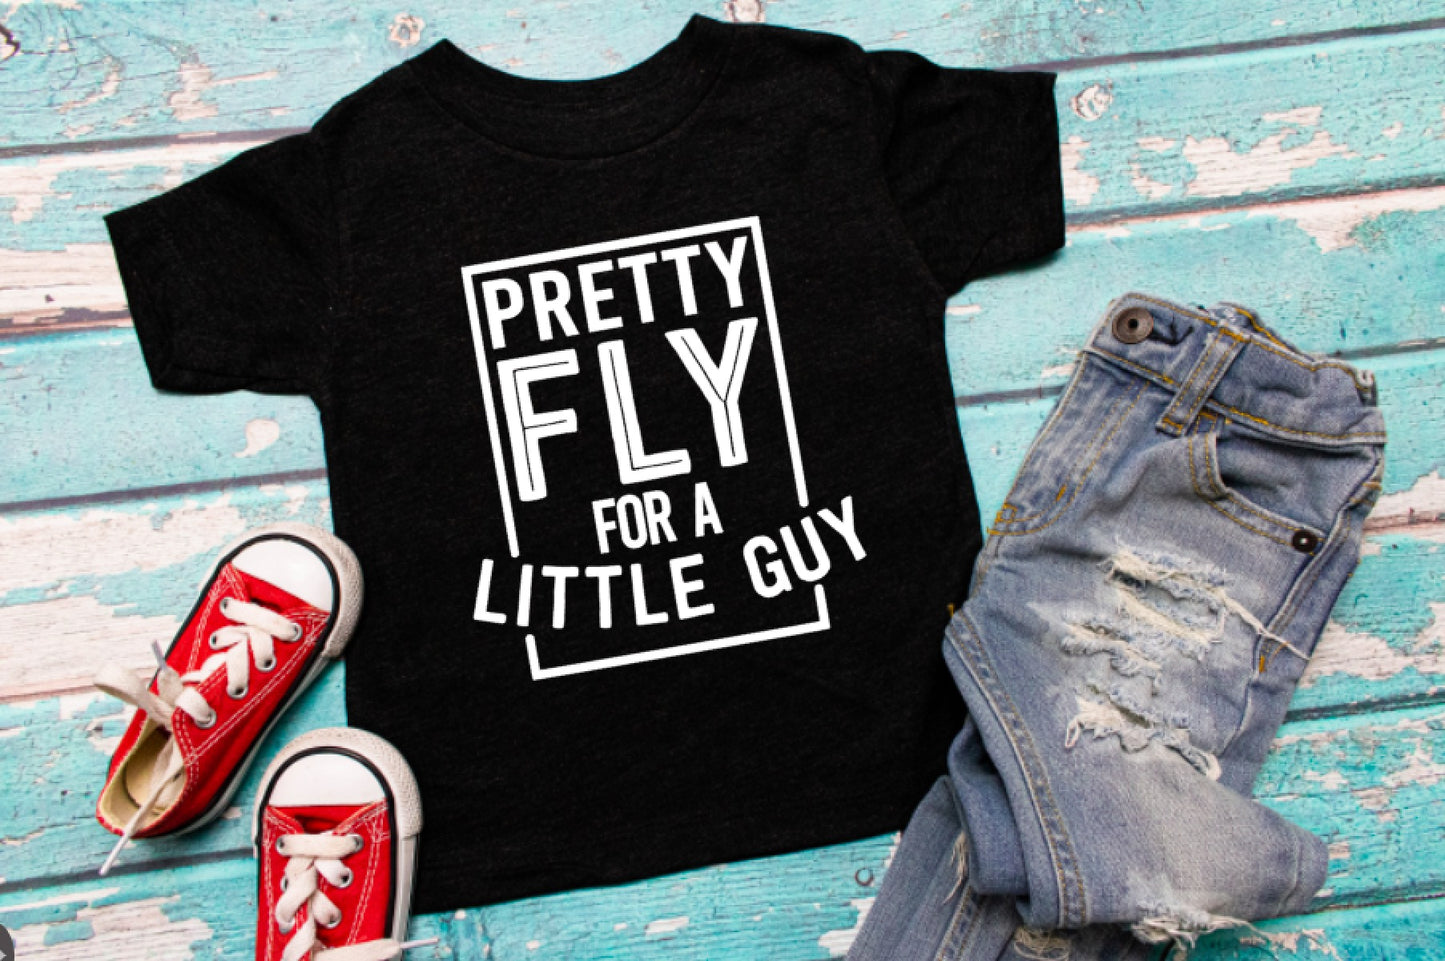 Pretty Fly for a Little Guy Design